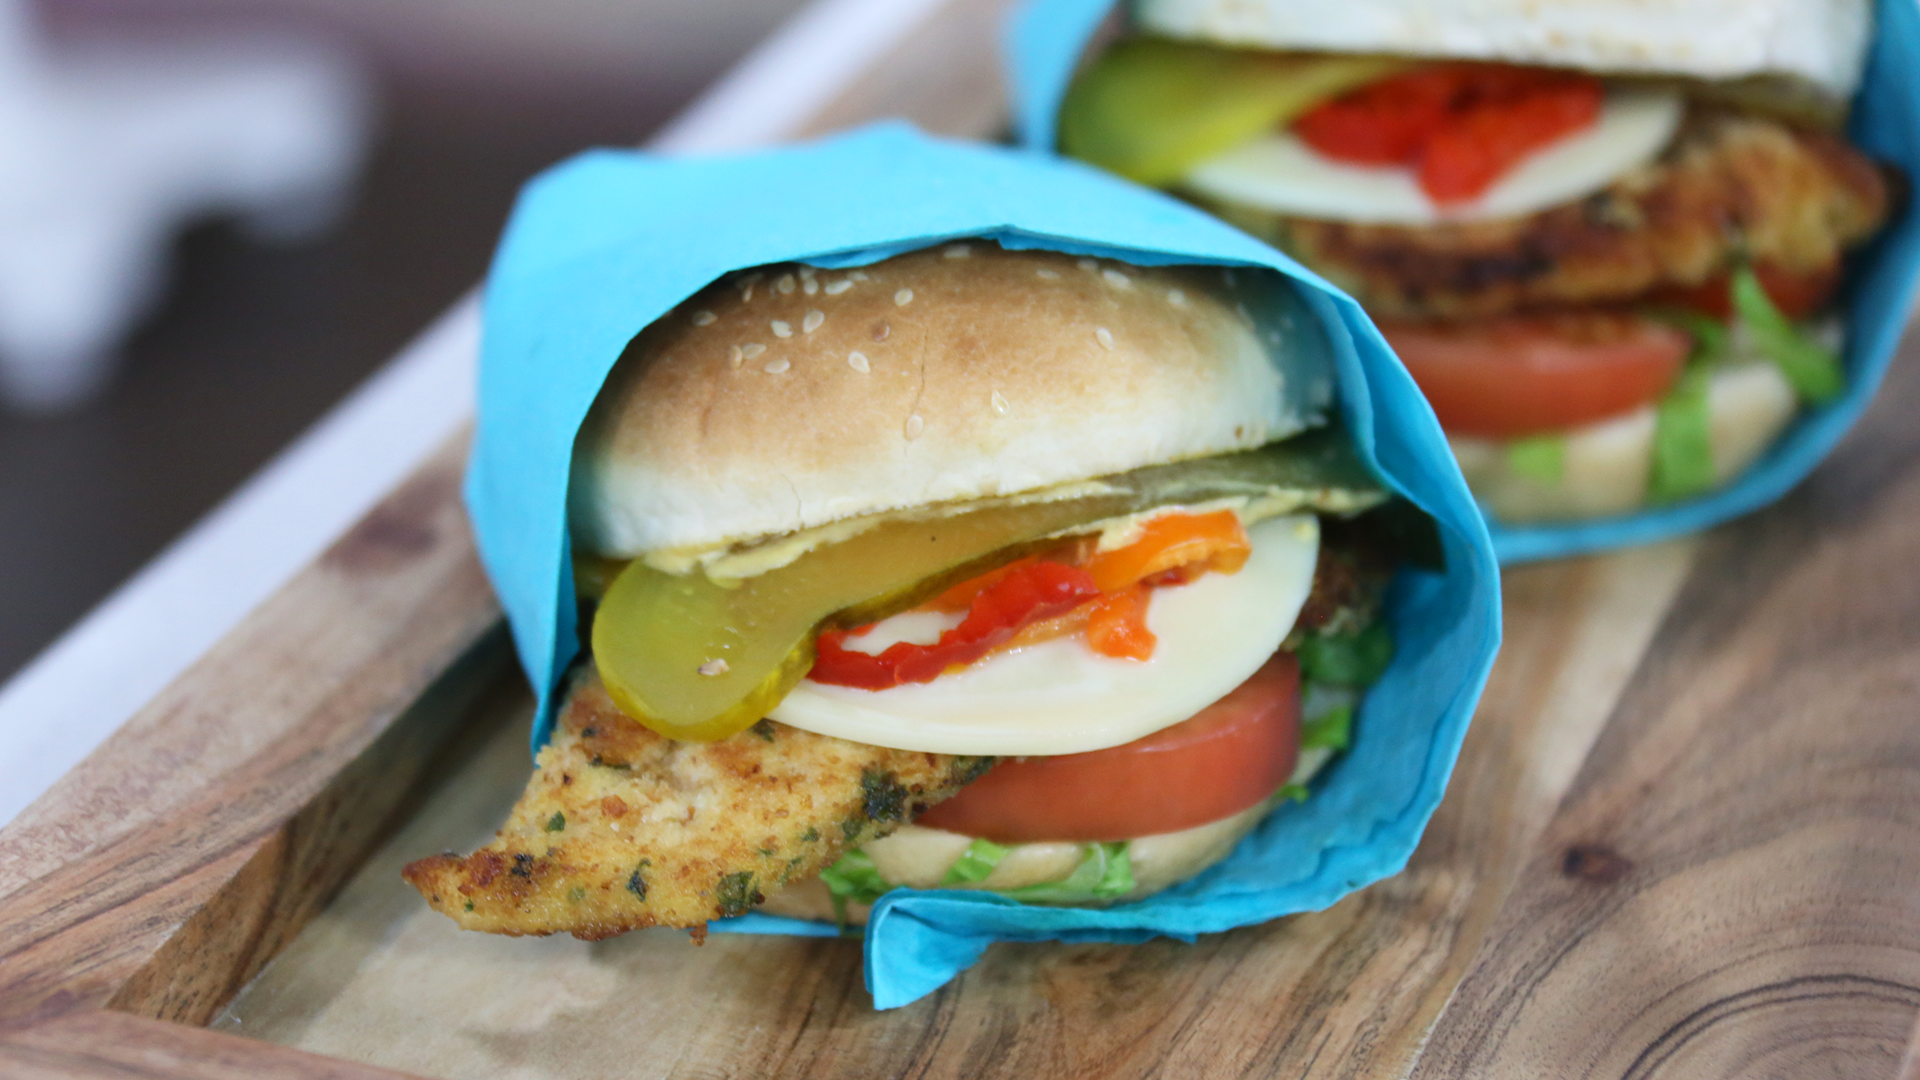 Lemon and provolone chicken cutlet sandwiches